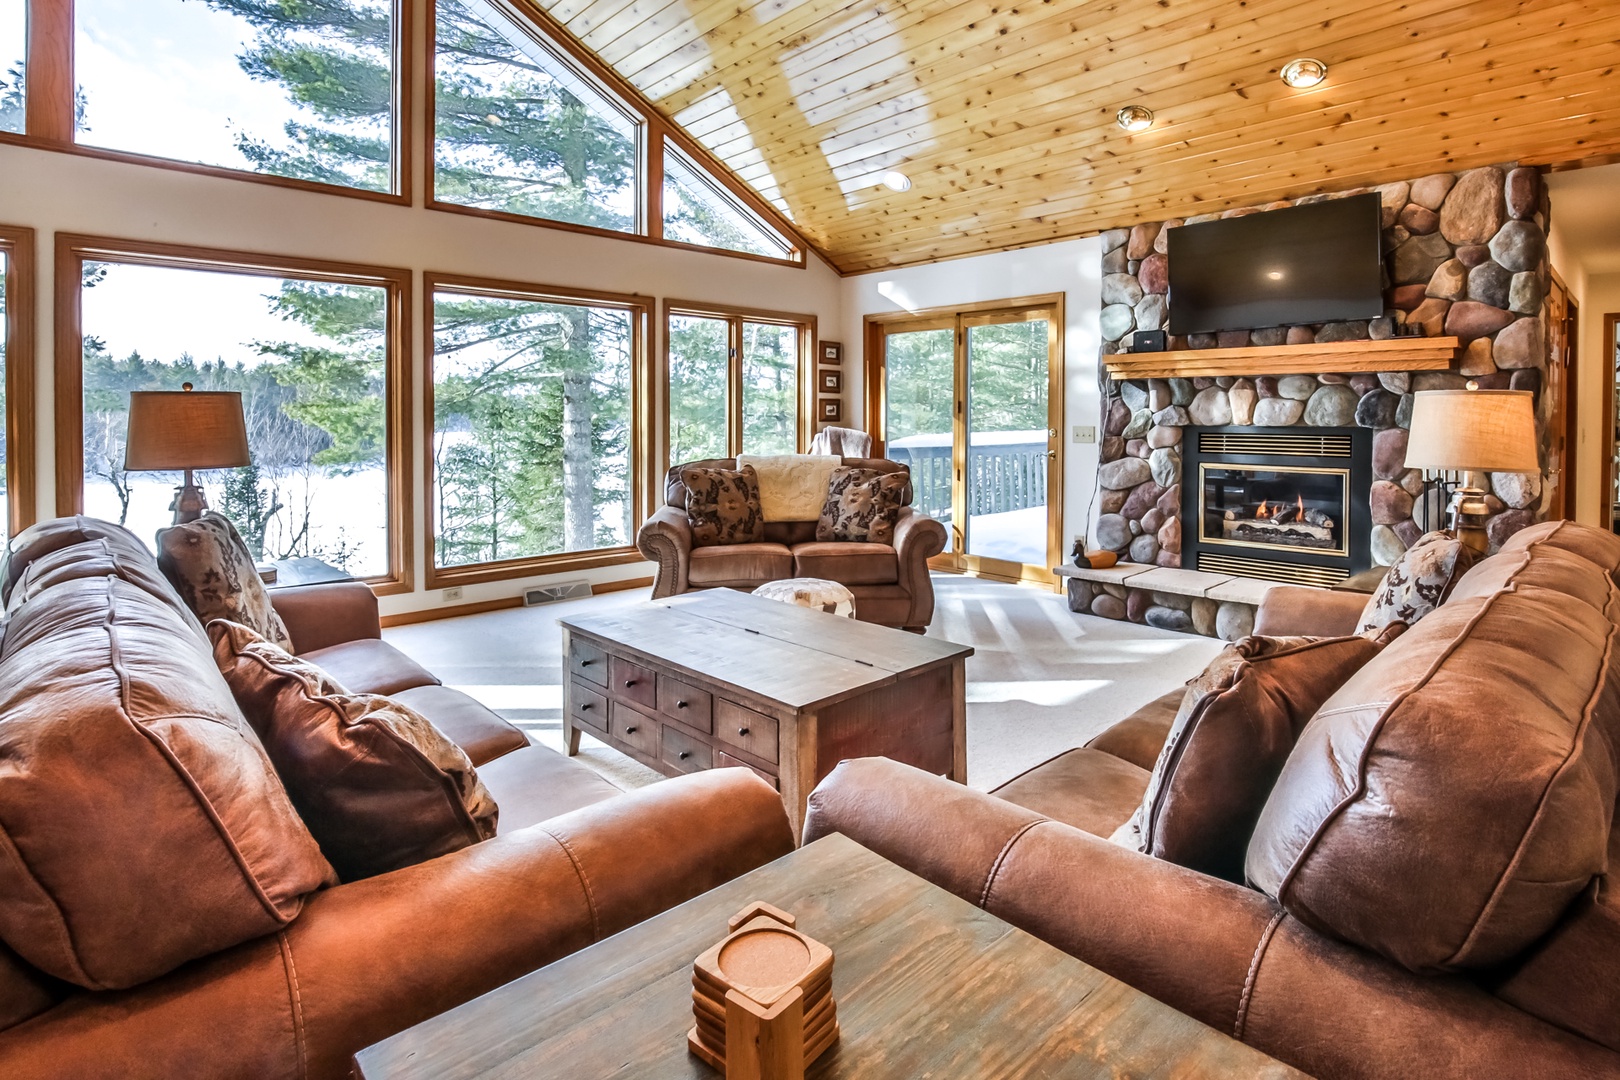 WhiteWoods Cove - Hiller Vacation Homes